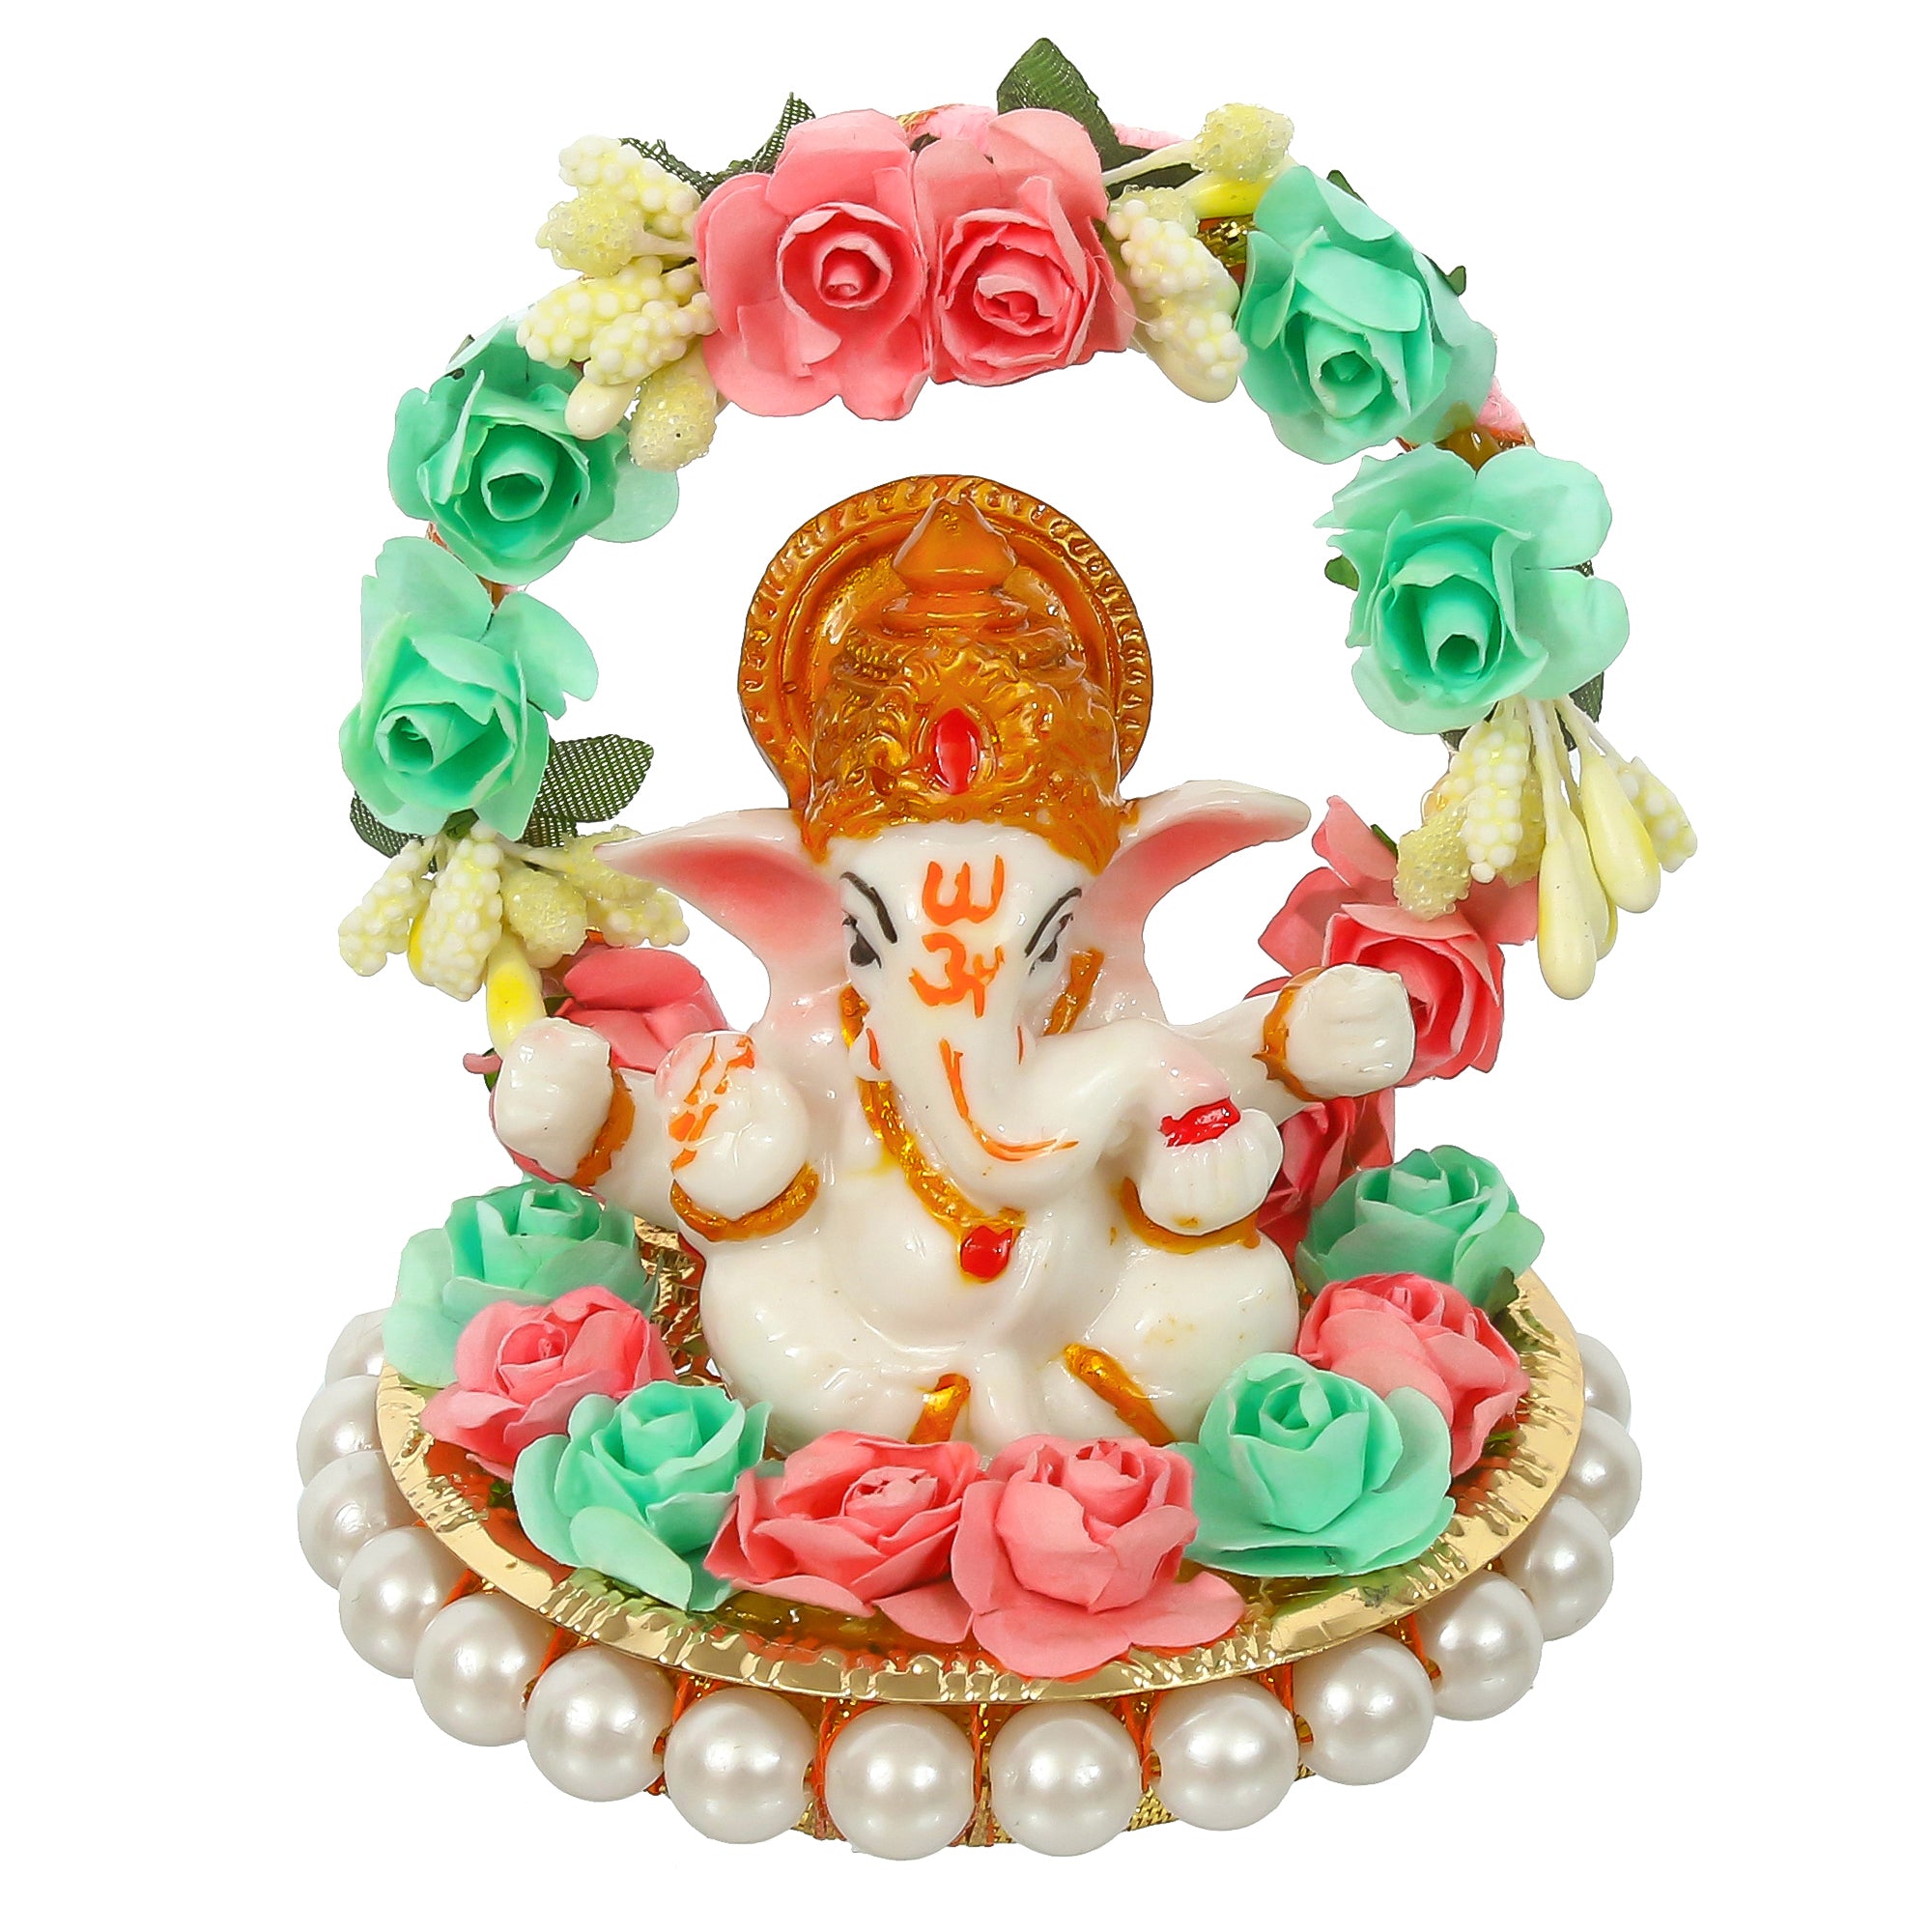 Lord Ganesha Idol On Decorative Handicrafted Plate With Throne Of Pink And Green Flowers 2